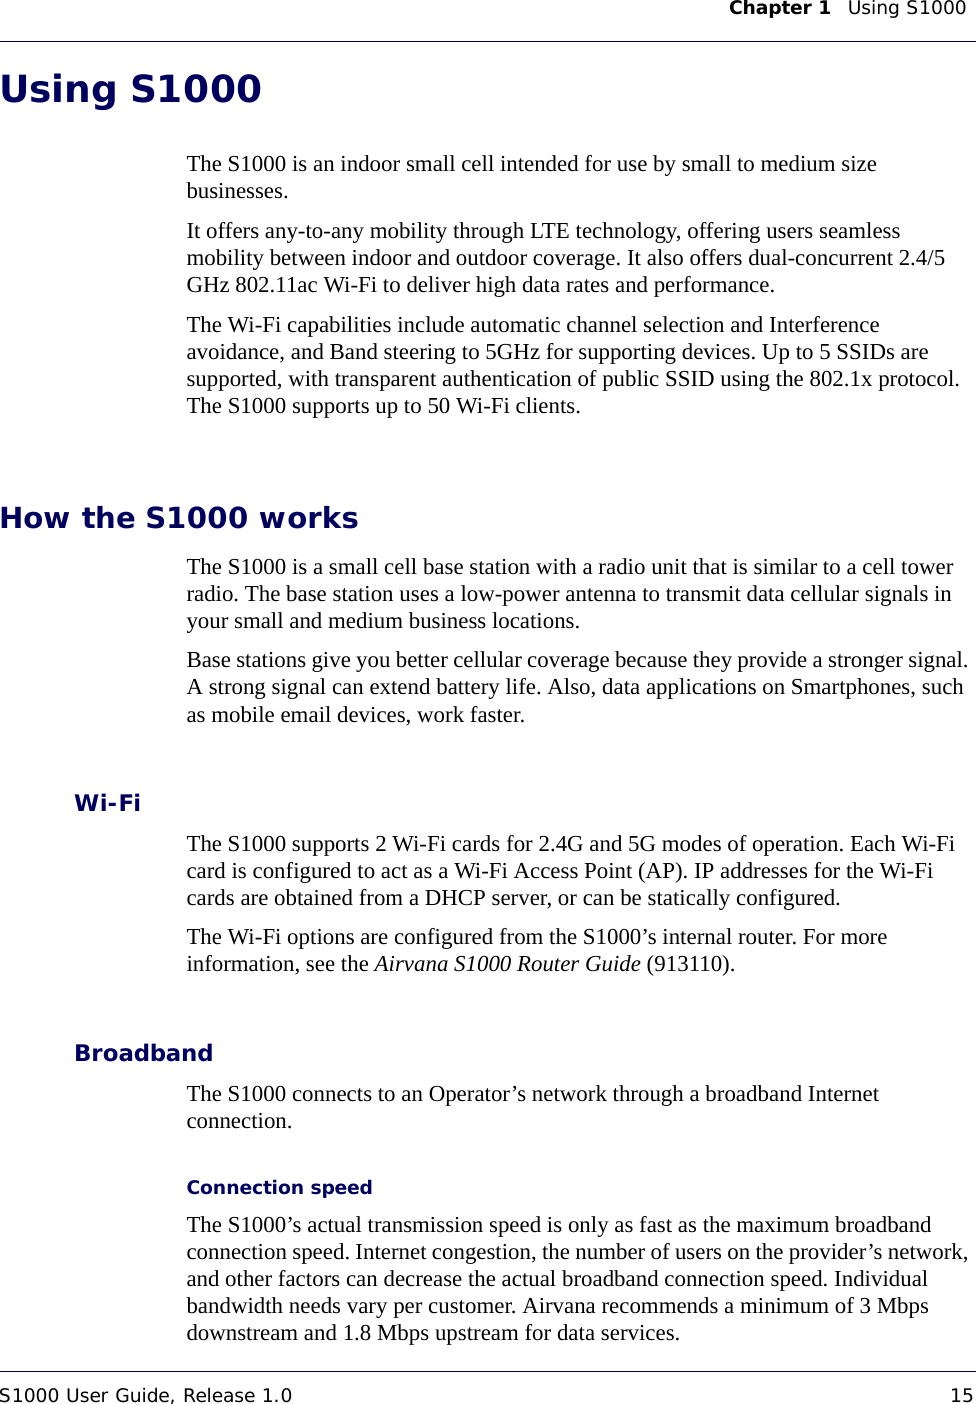 Chapter 1    Using S1000 S1000 User Guide, Release 1.0 15DRAFTUsing S1000The S1000 is an indoor small cell intended for use by small to medium size businesses.It offers any-to-any mobility through LTE technology, offering users seamless mobility between indoor and outdoor coverage. It also offers dual-concurrent 2.4/5 GHz 802.11ac Wi-Fi to deliver high data rates and performance. The Wi-Fi capabilities include automatic channel selection and Interference avoidance, and Band steering to 5GHz for supporting devices. Up to 5 SSIDs are supported, with transparent authentication of public SSID using the 802.1x protocol. The S1000 supports up to 50 Wi-Fi clients.How the S1000 worksThe S1000 is a small cell base station with a radio unit that is similar to a cell tower radio. The base station uses a low-power antenna to transmit data cellular signals in your small and medium business locations. Base stations give you better cellular coverage because they provide a stronger signal. A strong signal can extend battery life. Also, data applications on Smartphones, such as mobile email devices, work faster. Wi-FiThe S1000 supports 2 Wi-Fi cards for 2.4G and 5G modes of operation. Each Wi-Fi card is configured to act as a Wi-Fi Access Point (AP). IP addresses for the Wi-Fi cards are obtained from a DHCP server, or can be statically configured.The Wi-Fi options are configured from the S1000’s internal router. For more information, see the Airvana S1000 Router Guide (913110).BroadbandThe S1000 connects to an Operator’s network through a broadband Internet connection. Connection speedThe S1000’s actual transmission speed is only as fast as the maximum broadband connection speed. Internet congestion, the number of users on the provider’s network, and other factors can decrease the actual broadband connection speed. Individual bandwidth needs vary per customer. Airvana recommends a minimum of 3 Mbps downstream and 1.8 Mbps upstream for data services. 